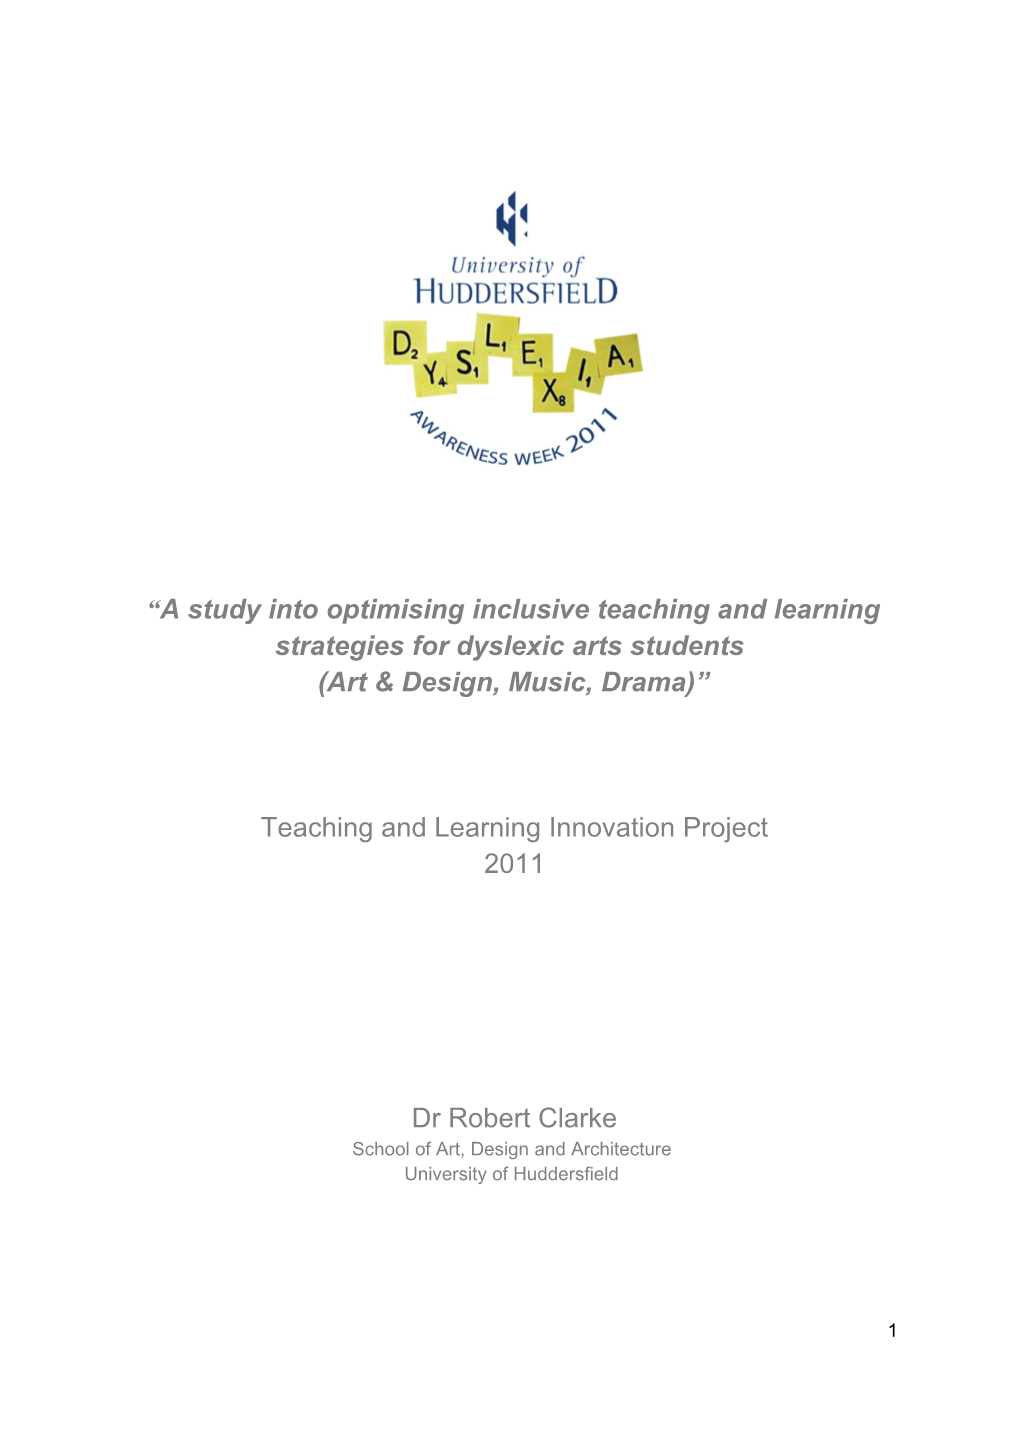 A Study Into Optimising Inclusive Teaching and Learning Strategies for Dyslexic Arts Students